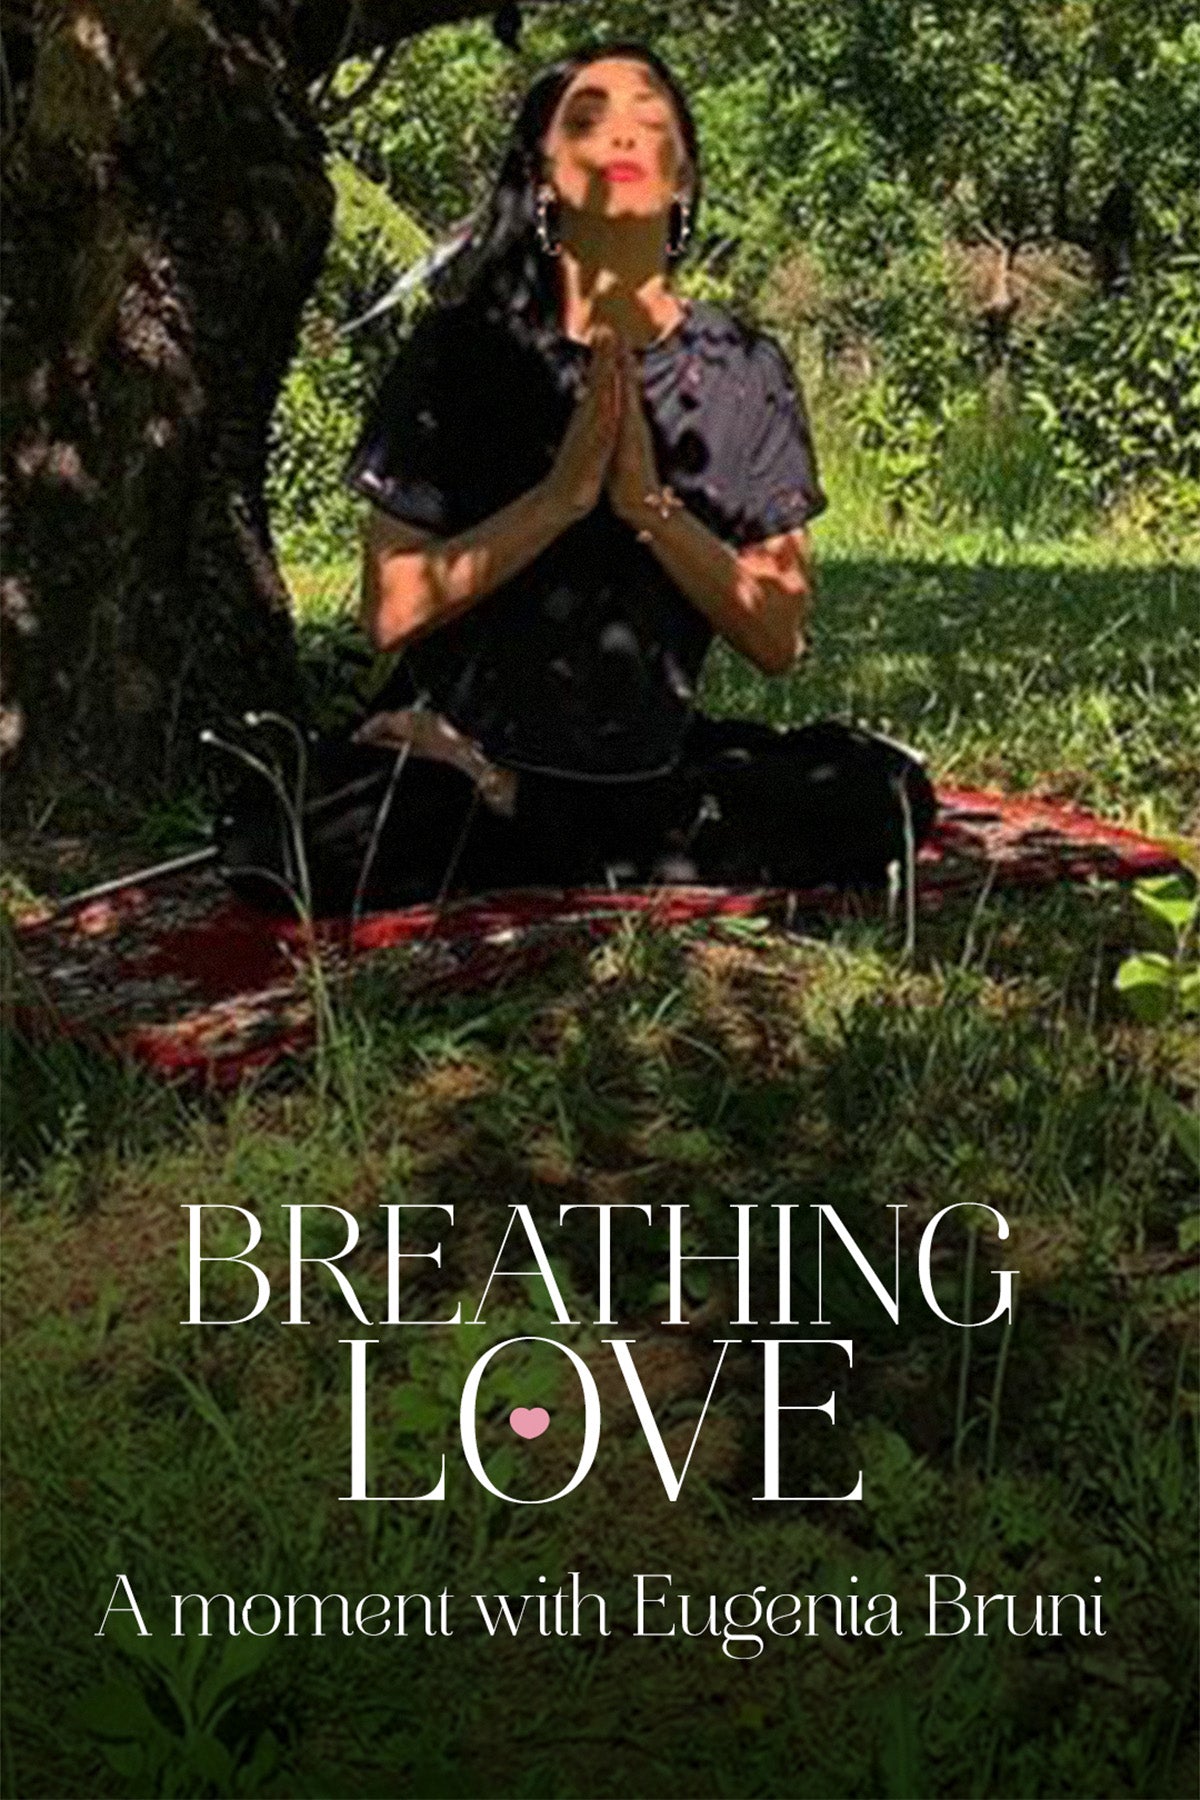 Breathing Love: A Moment with Eugenia Bruni - May 7th - 5.00PM CET